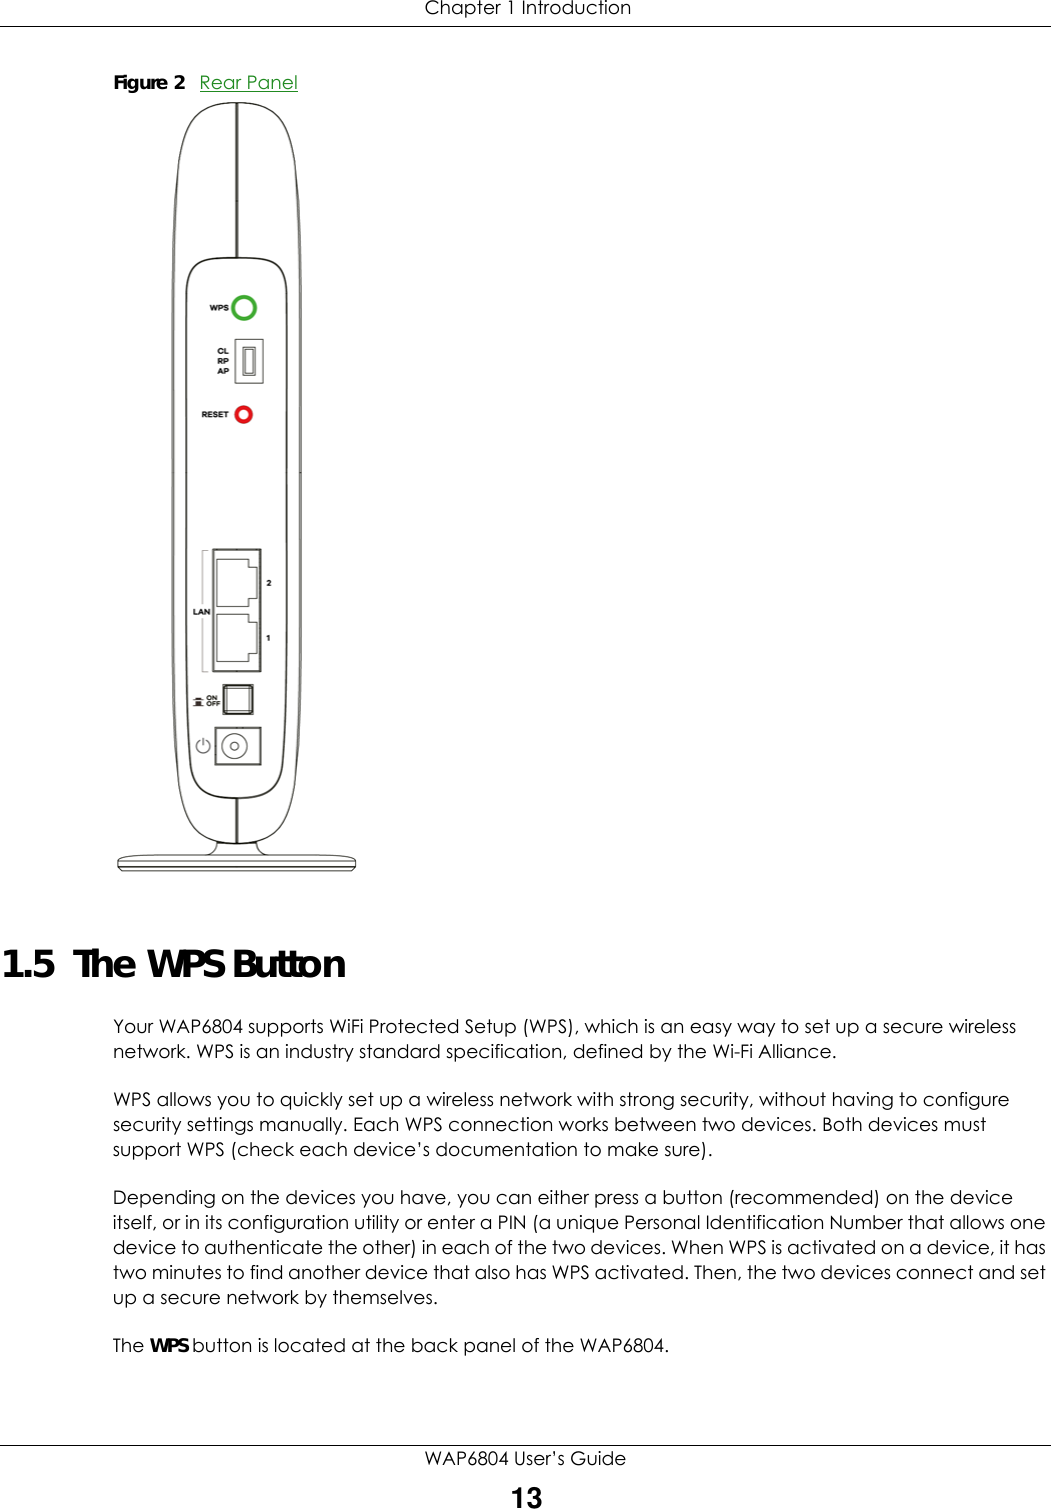  Chapter 1 IntroductionWAP6804 User’s Guide13Figure 2   Rear Panel1.5  The WPS ButtonYour WAP6804 supports WiFi Protected Setup (WPS), which is an easy way to set up a secure wireless network. WPS is an industry standard specification, defined by the Wi-Fi Alliance.WPS allows you to quickly set up a wireless network with strong security, without having to configure security settings manually. Each WPS connection works between two devices. Both devices must support WPS (check each device’s documentation to make sure). Depending on the devices you have, you can either press a button (recommended) on the device itself, or in its configuration utility or enter a PIN (a unique Personal Identification Number that allows one device to authenticate the other) in each of the two devices. When WPS is activated on a device, it has two minutes to find another device that also has WPS activated. Then, the two devices connect and set up a secure network by themselves.The WPS button is located at the back panel of the WAP6804.